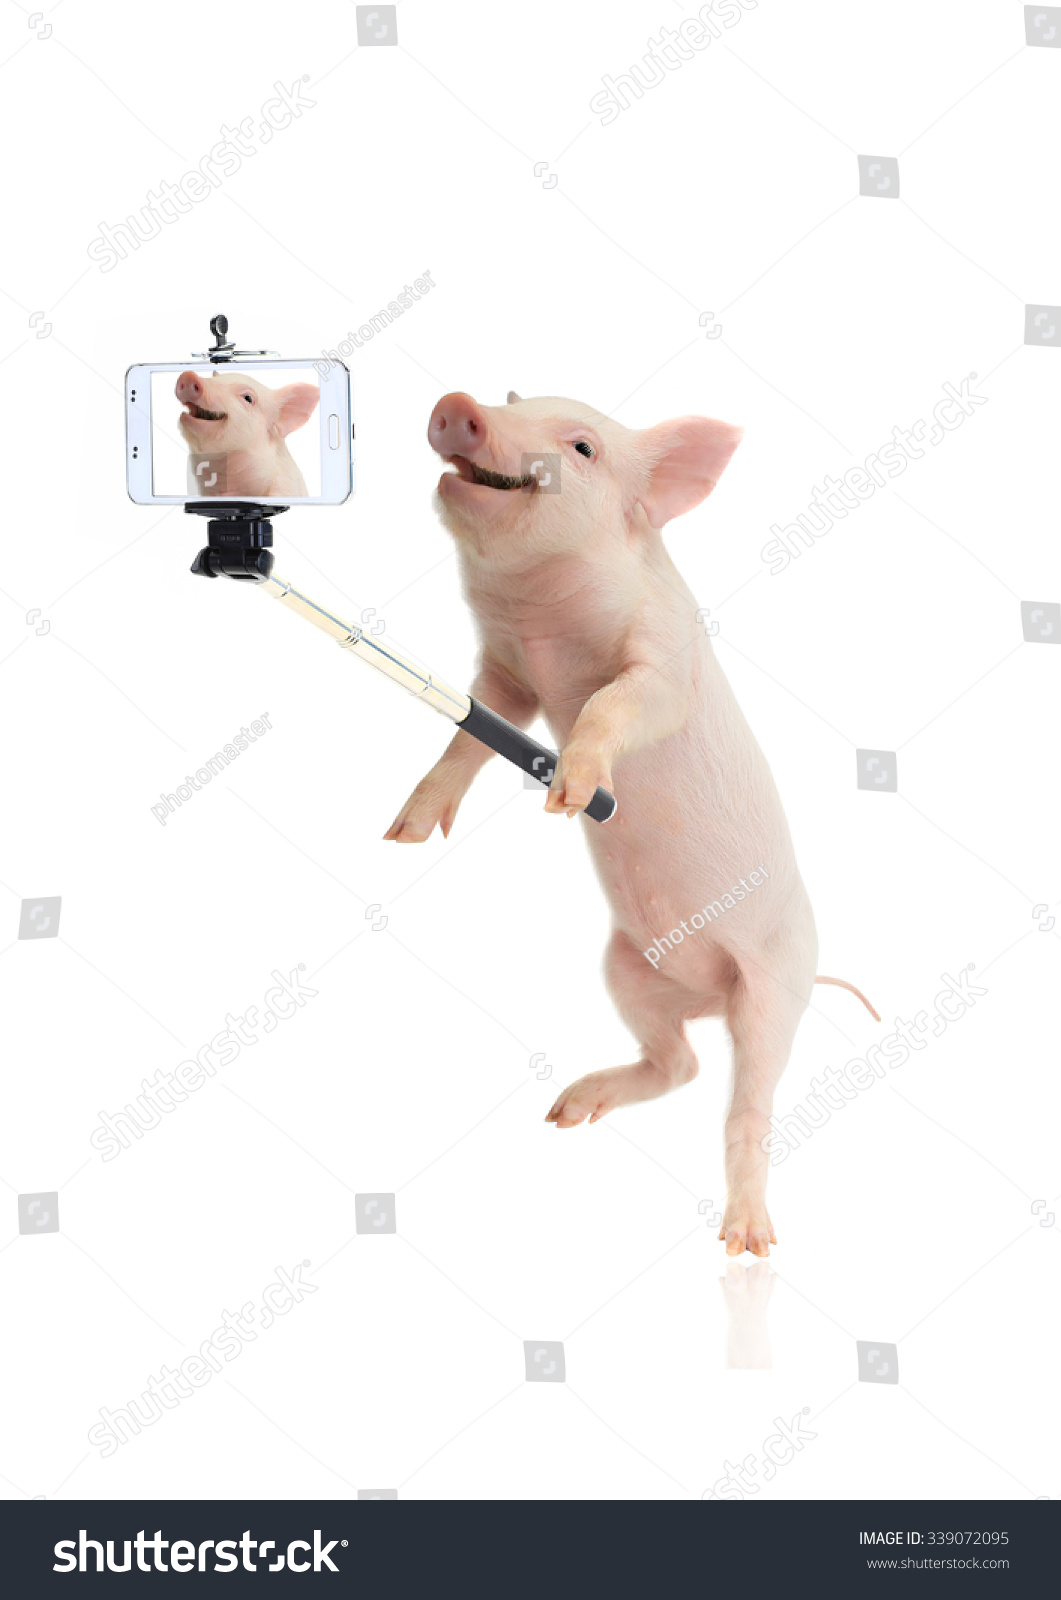 stock-photo-smile-pig-taking-a-selfie-to